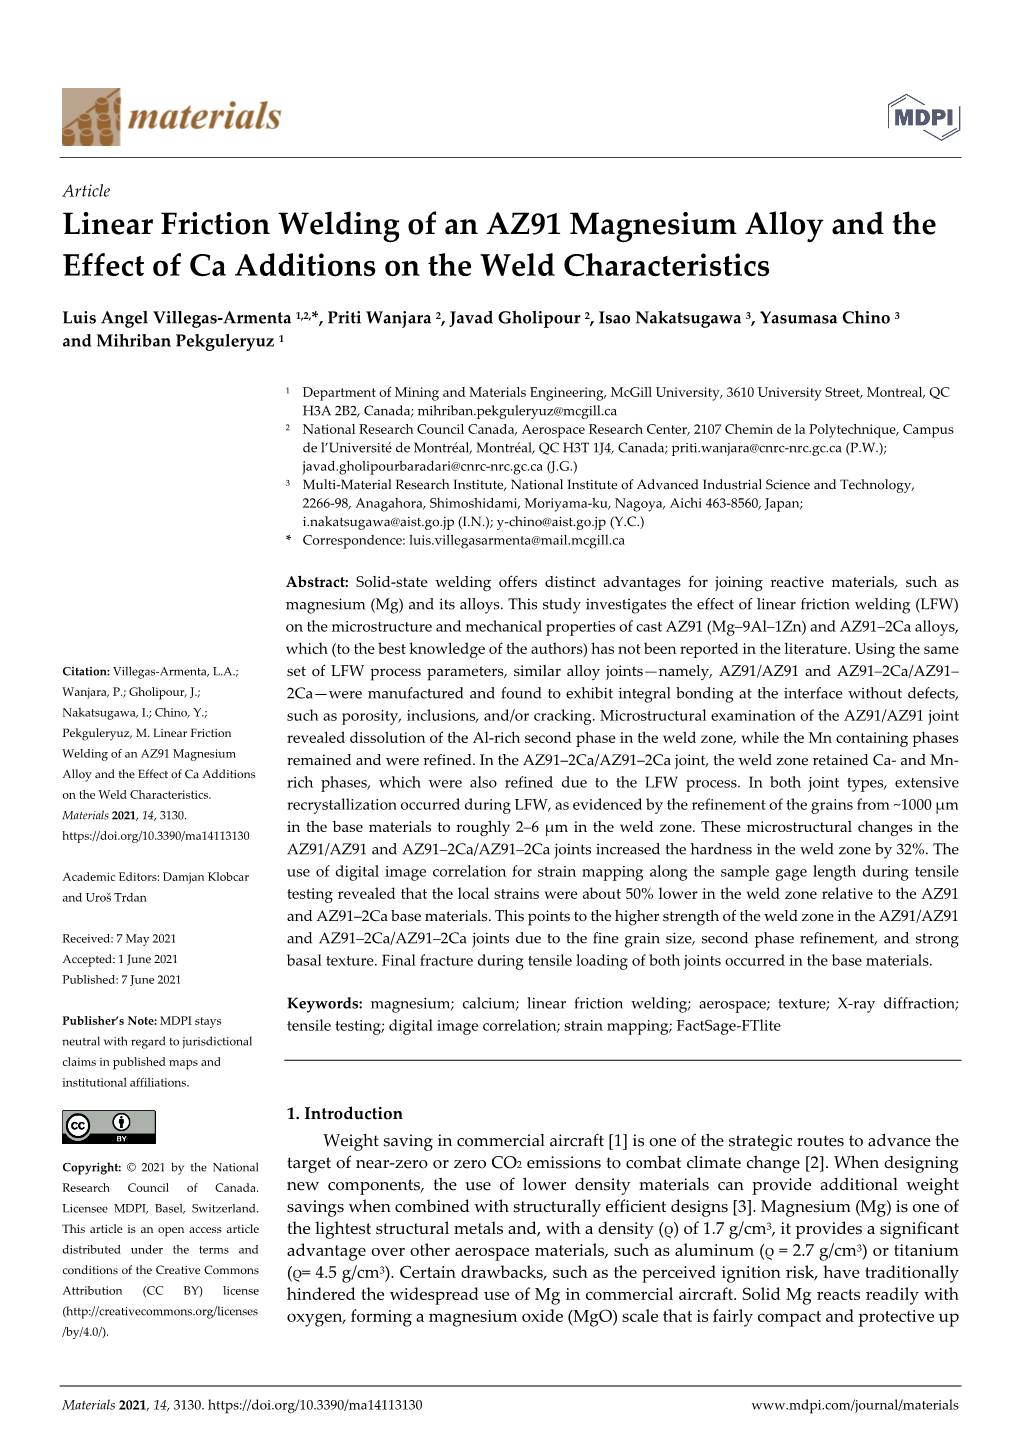 Linear Friction Welding of an AZ91 Magnesium Alloy and the Effect of Ca Additions on the Weld Characteristics